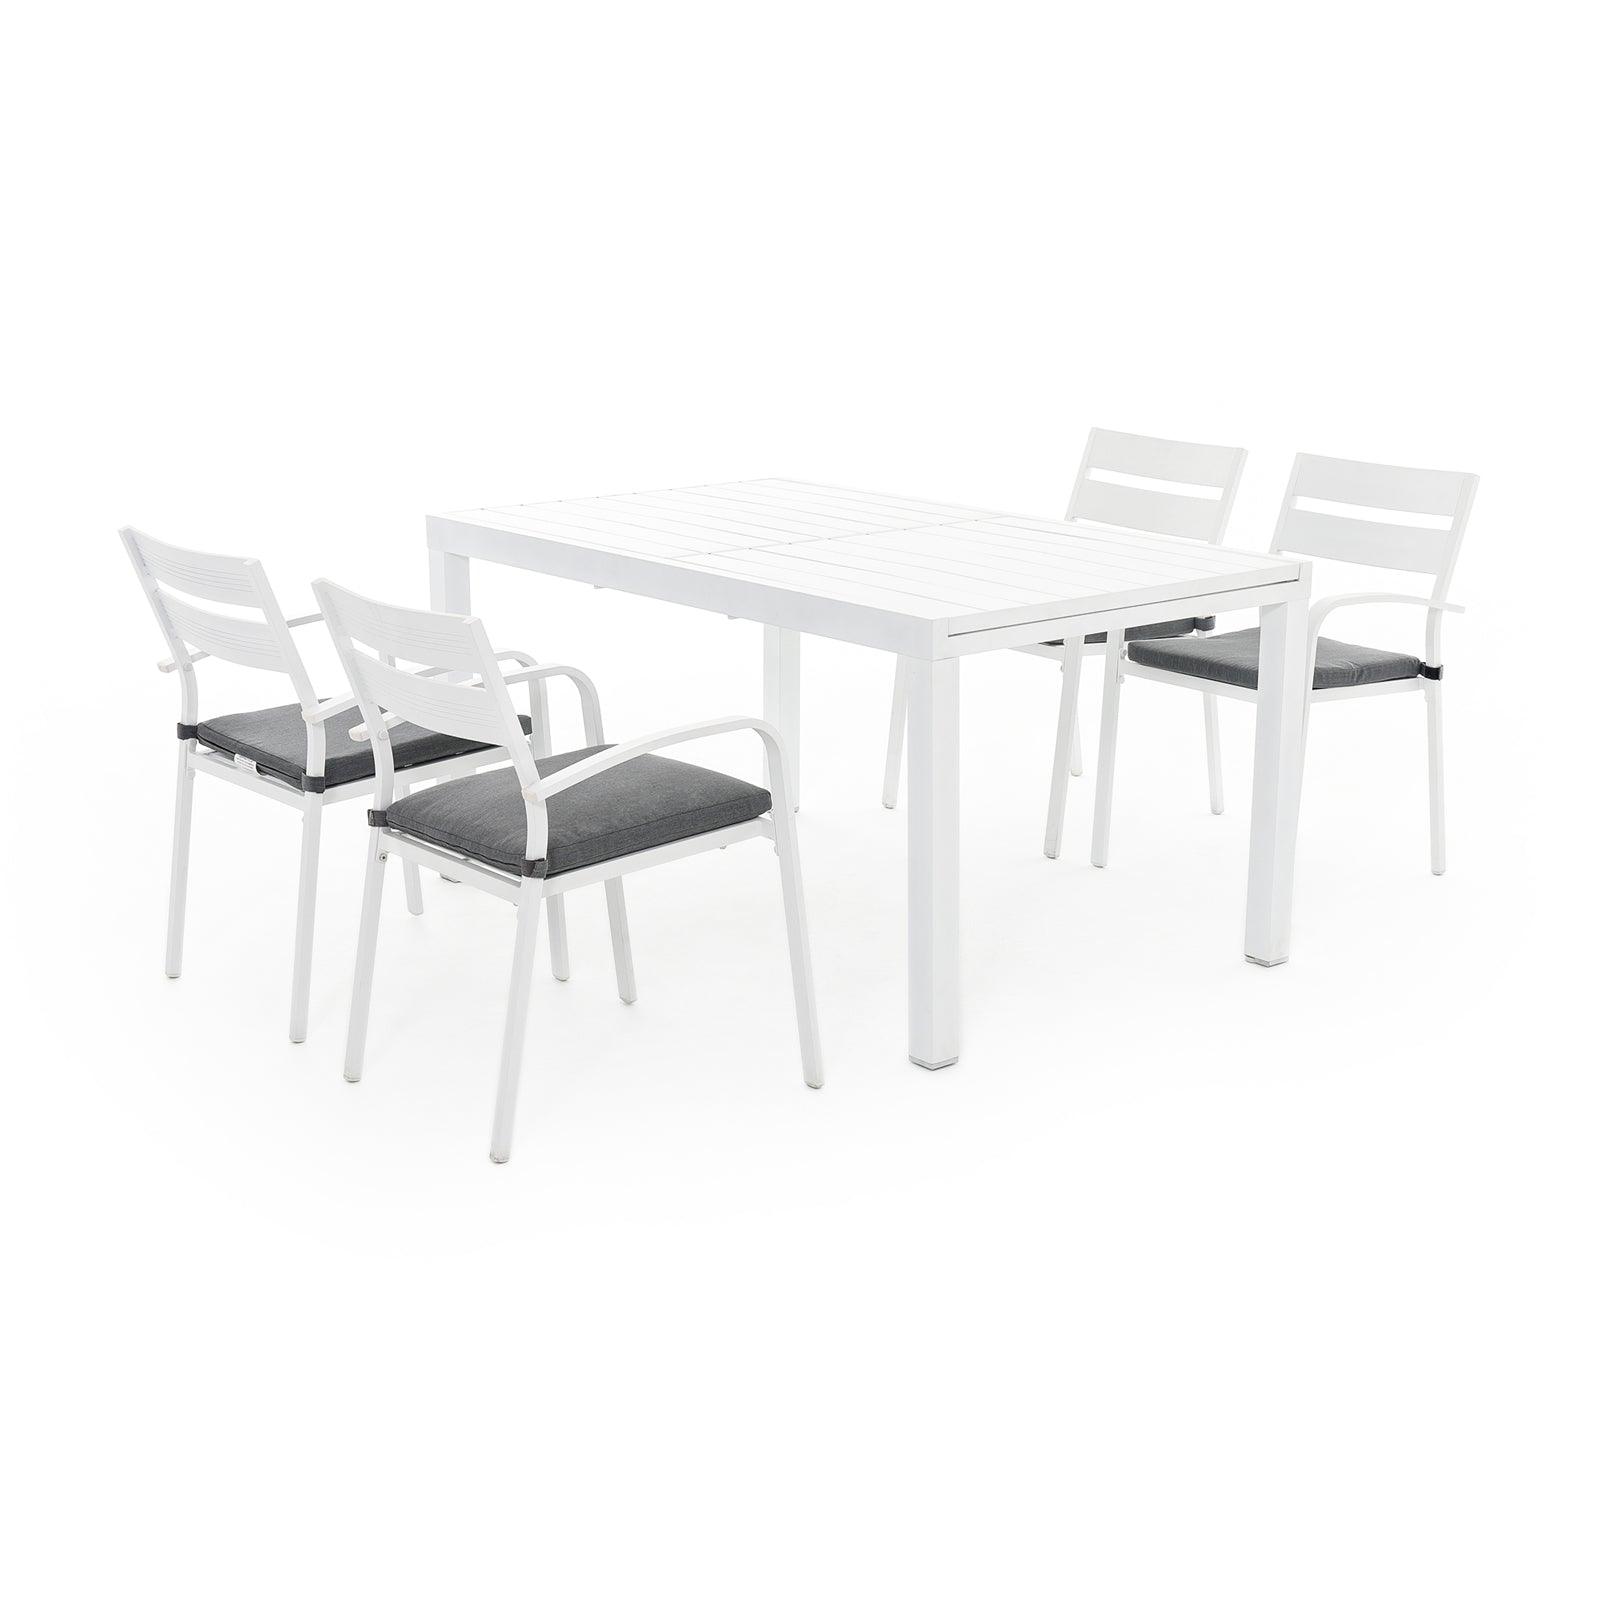 Salina White Aluminum Outdoor Dining Set, 4 dining chairs with cushions and 1 Extendable Table - Jardina Furniture #color_White#Pieces_5-pc.